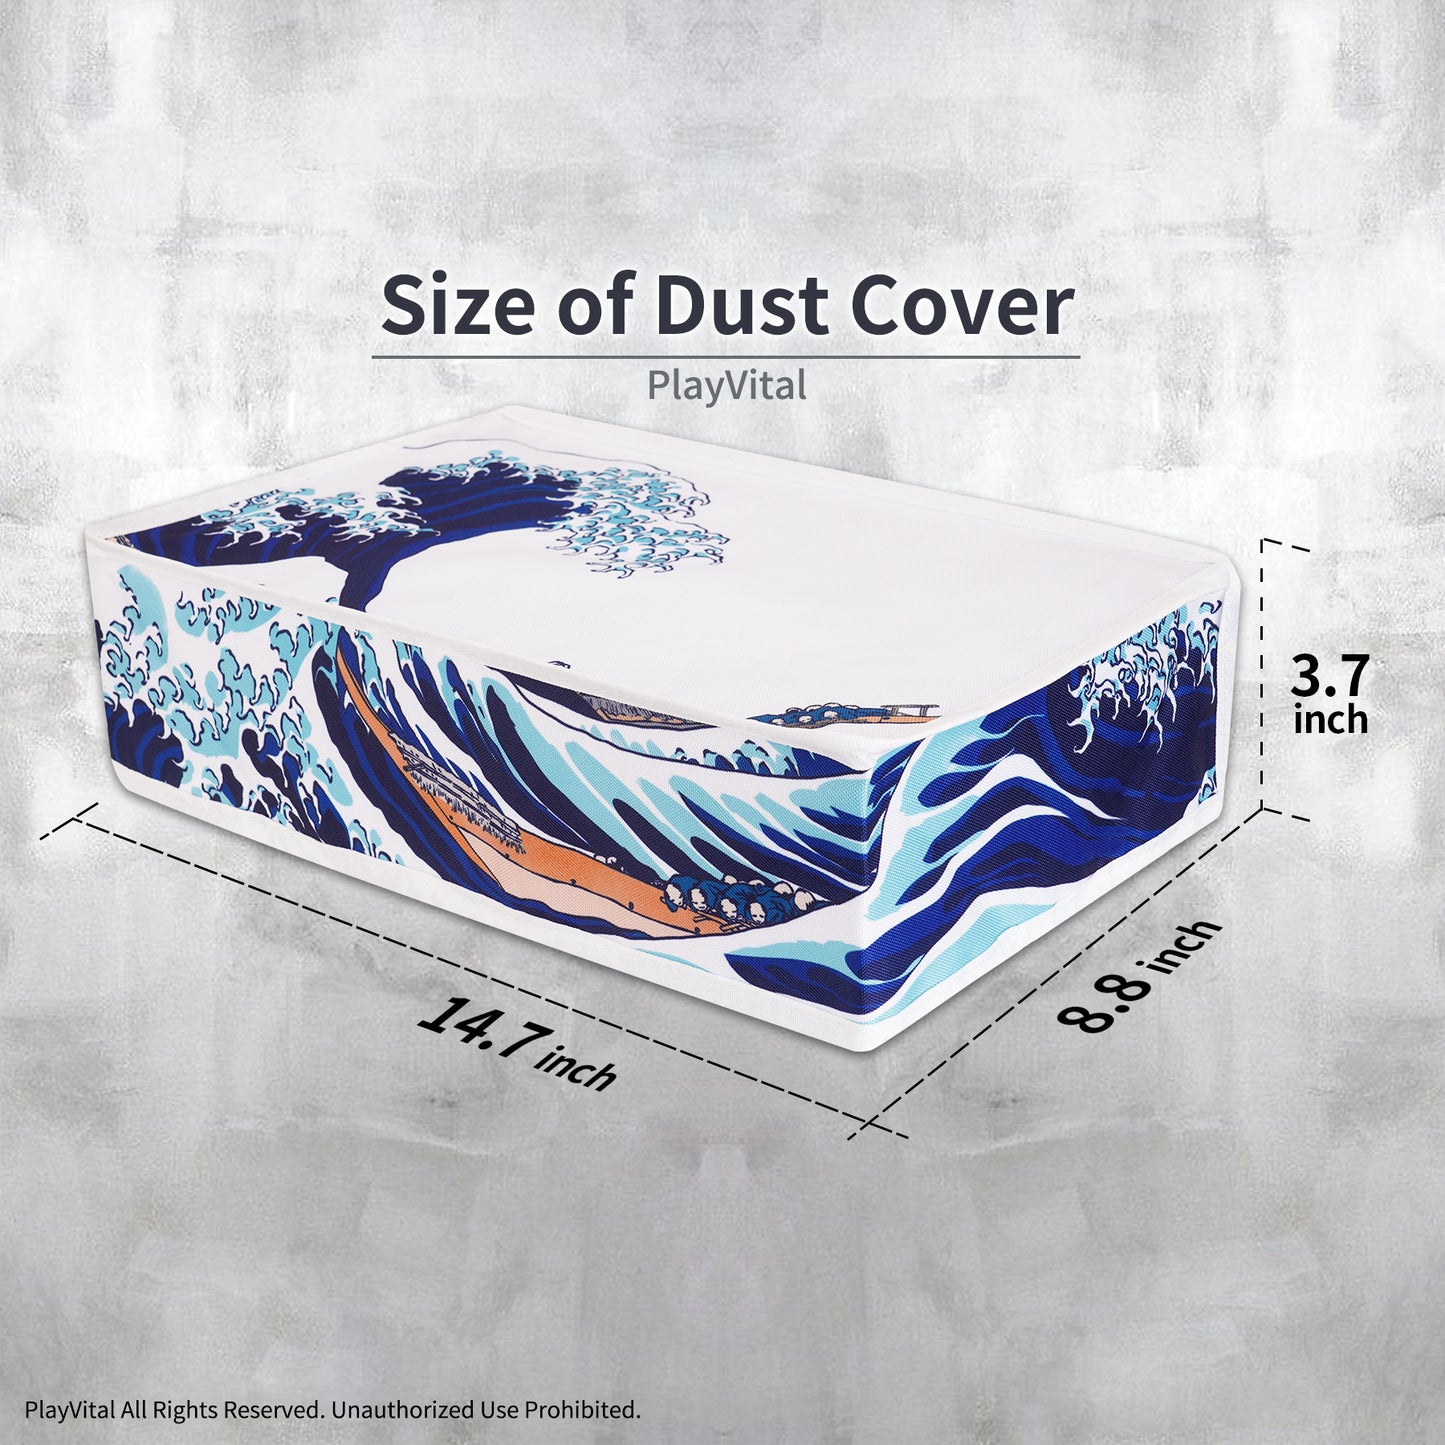 PlayVital Horizontal Dust Cover for ps5 Slim Disc Edition(The New Smaller Design), Nylon Dust Proof Protector Waterproof Cover Sleeve for ps5 Slim Console - The Great Wave - HUYPFH001 PlayVital